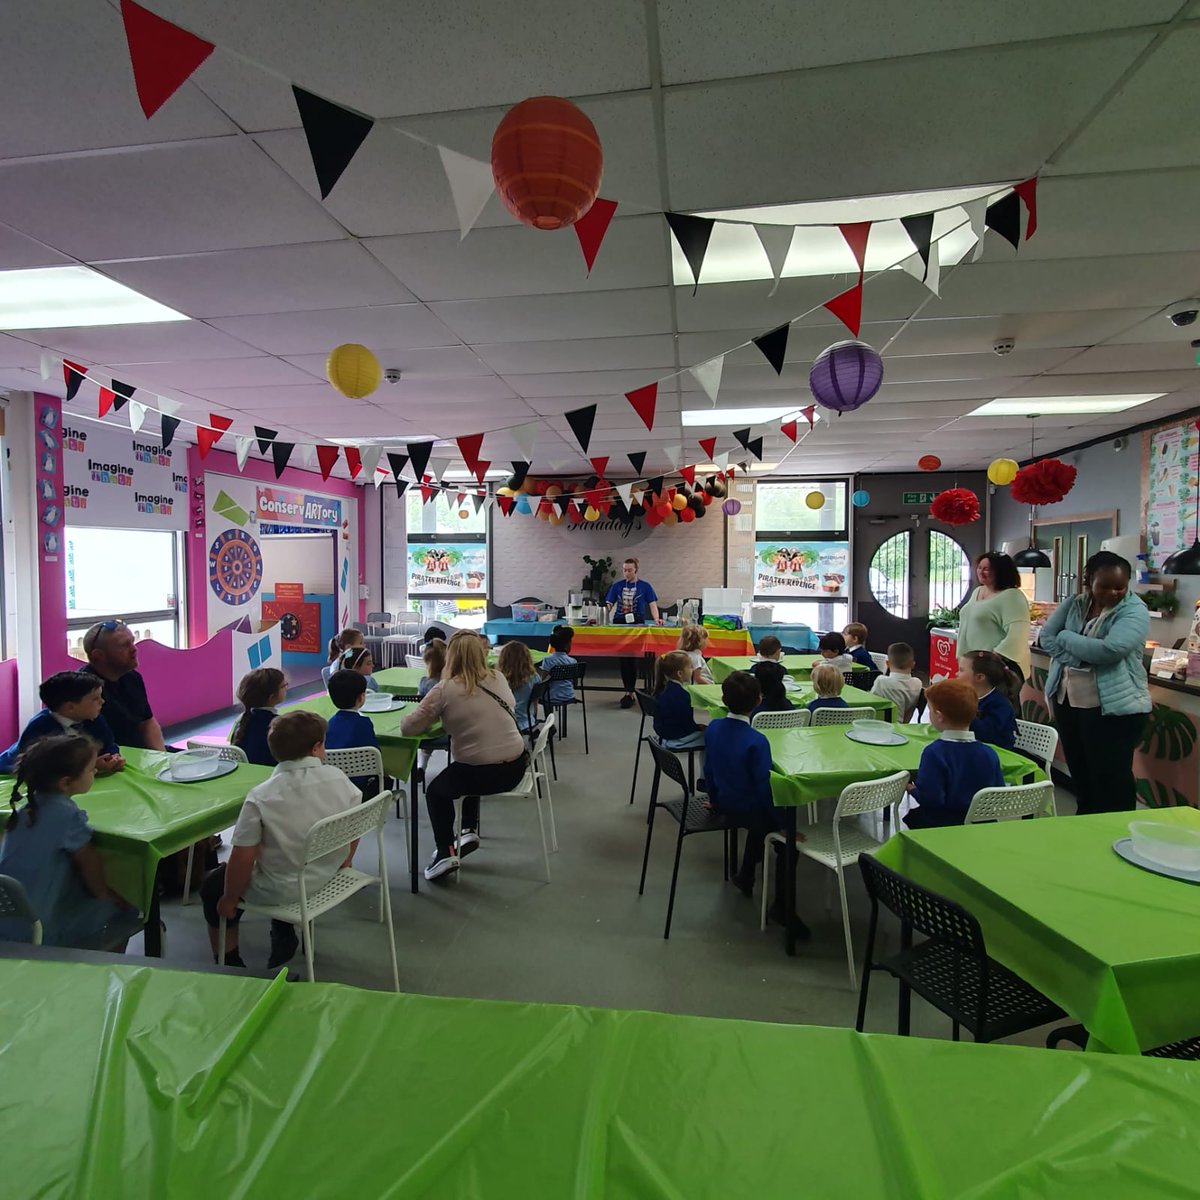 . 🧪✨ Reception have arrived at Imagine That, where they'll be conducting some exciting experiments! Stay tuned for updates on their scientific adventures. #schooltrip #experiments #scienceeducation